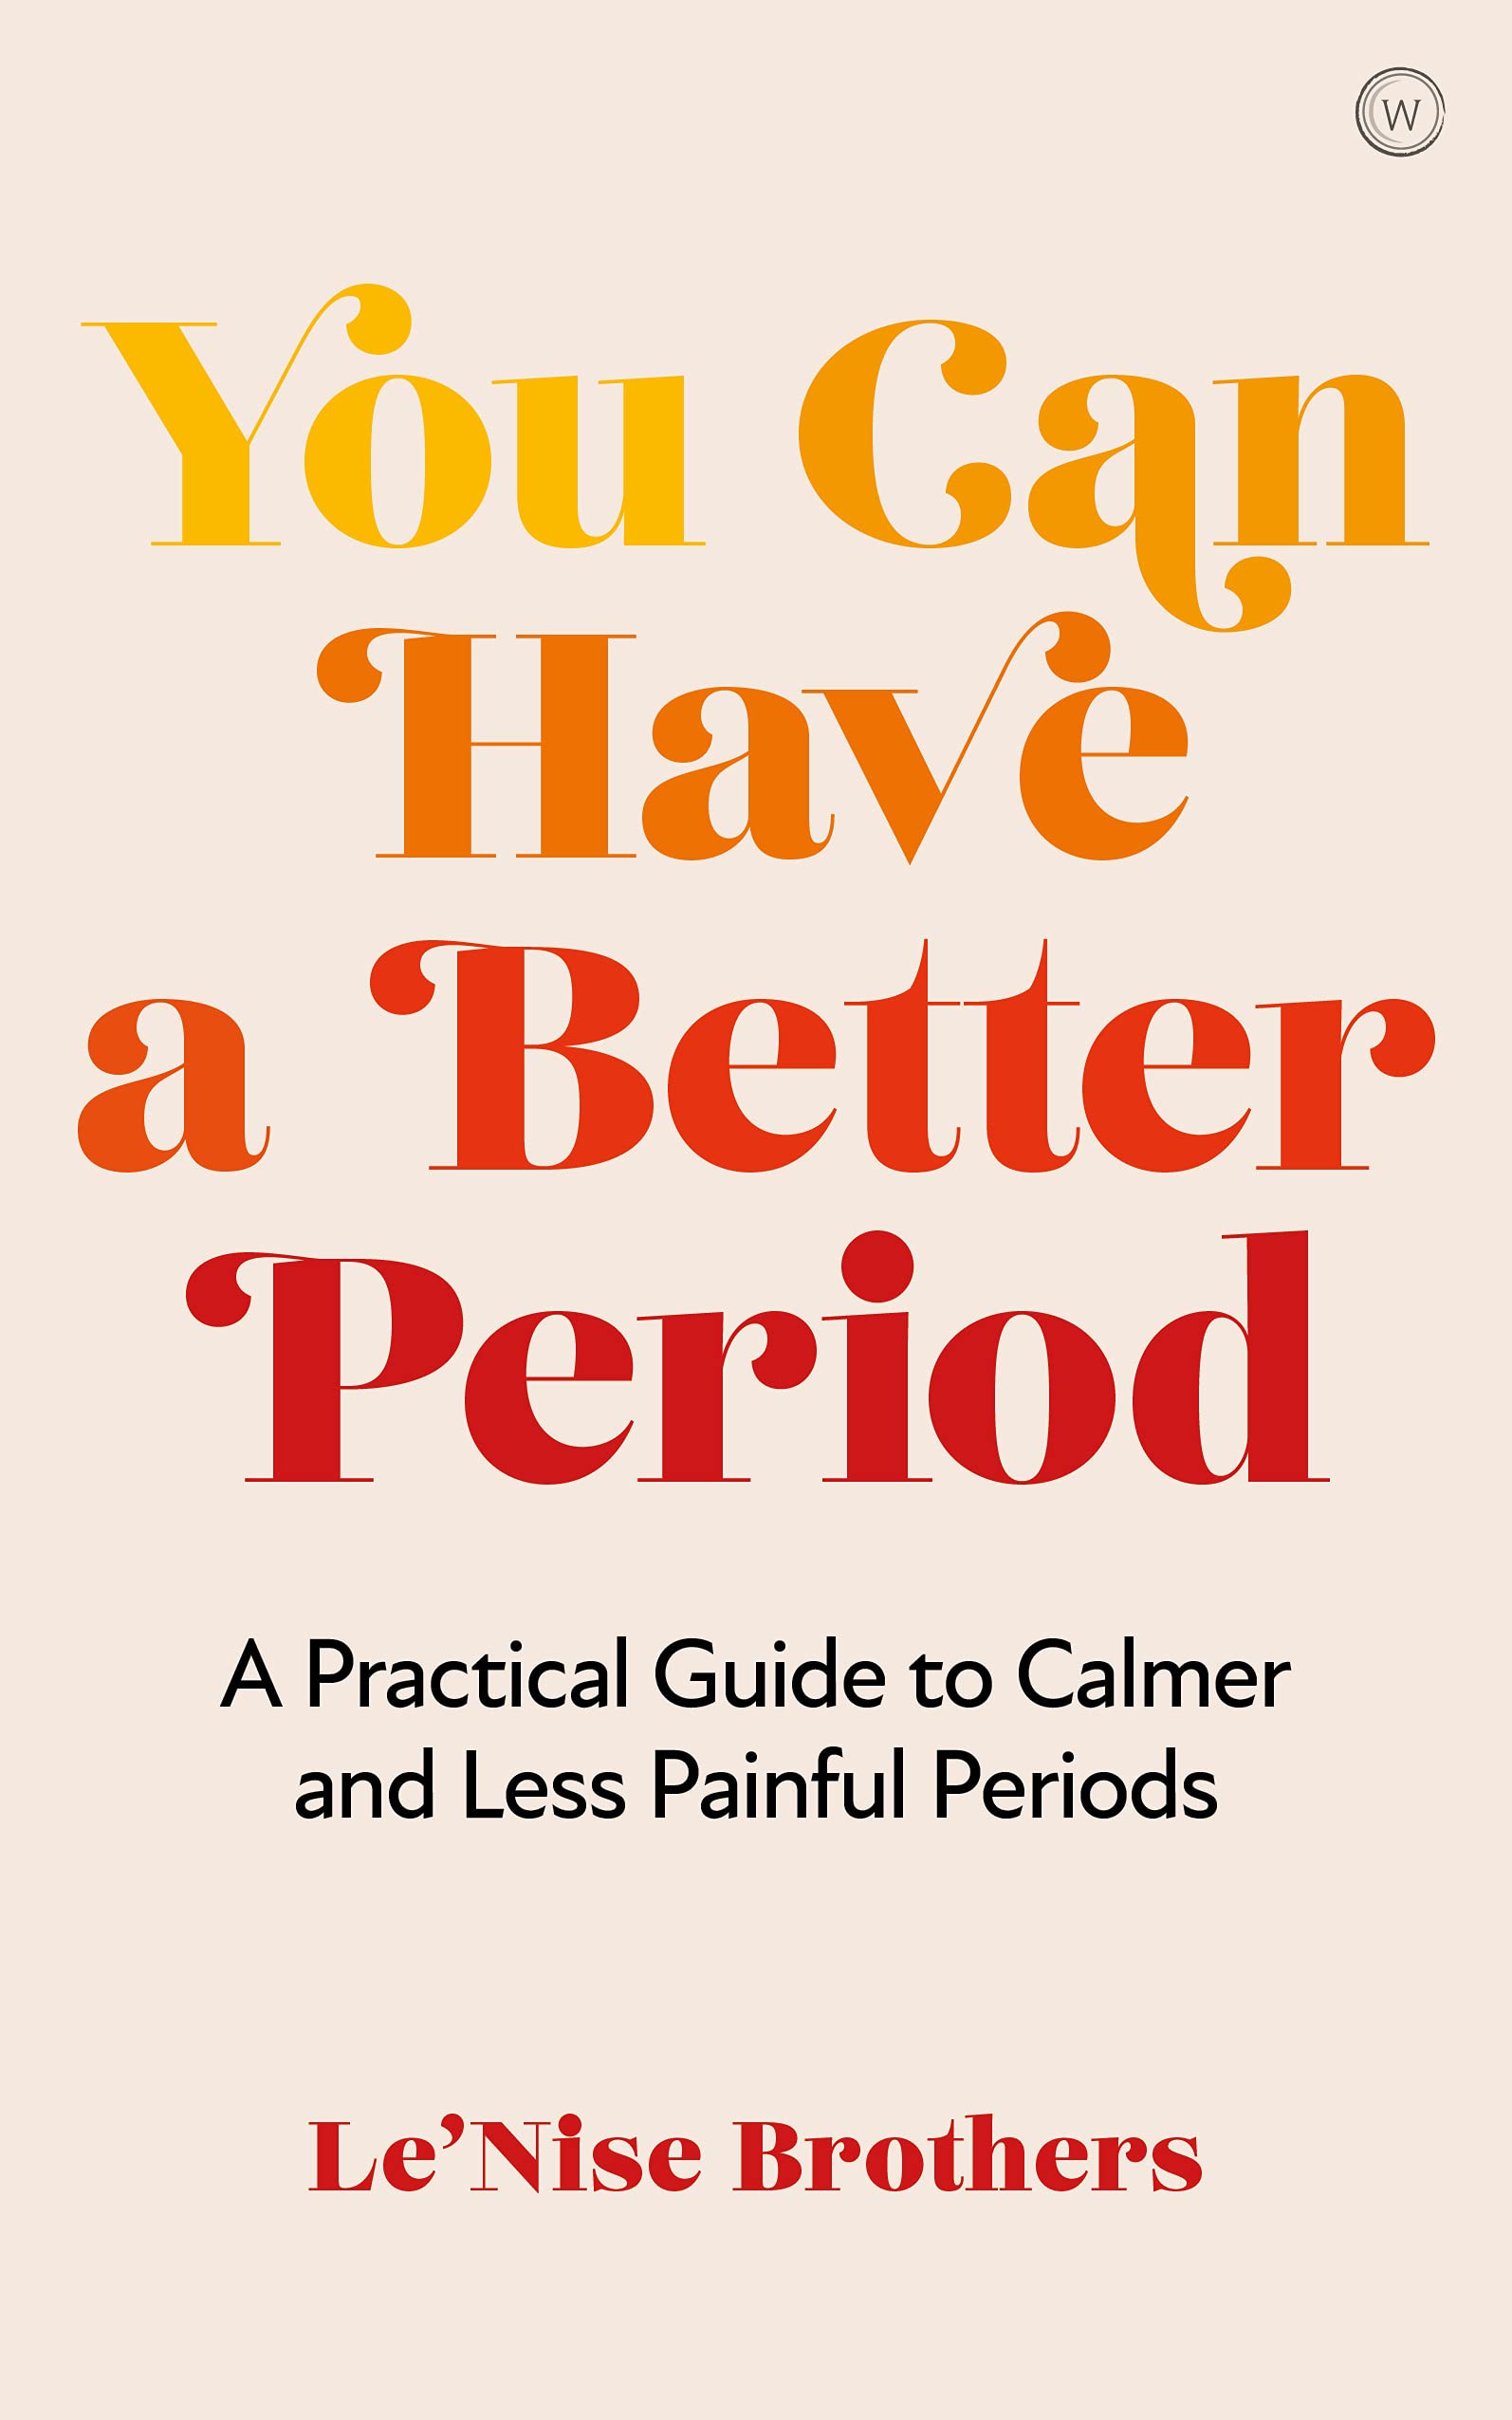 You Can Have a Better Period: A Practical Guide to Pain-Free and Calmer Periods - SureShot Books Publishing LLC